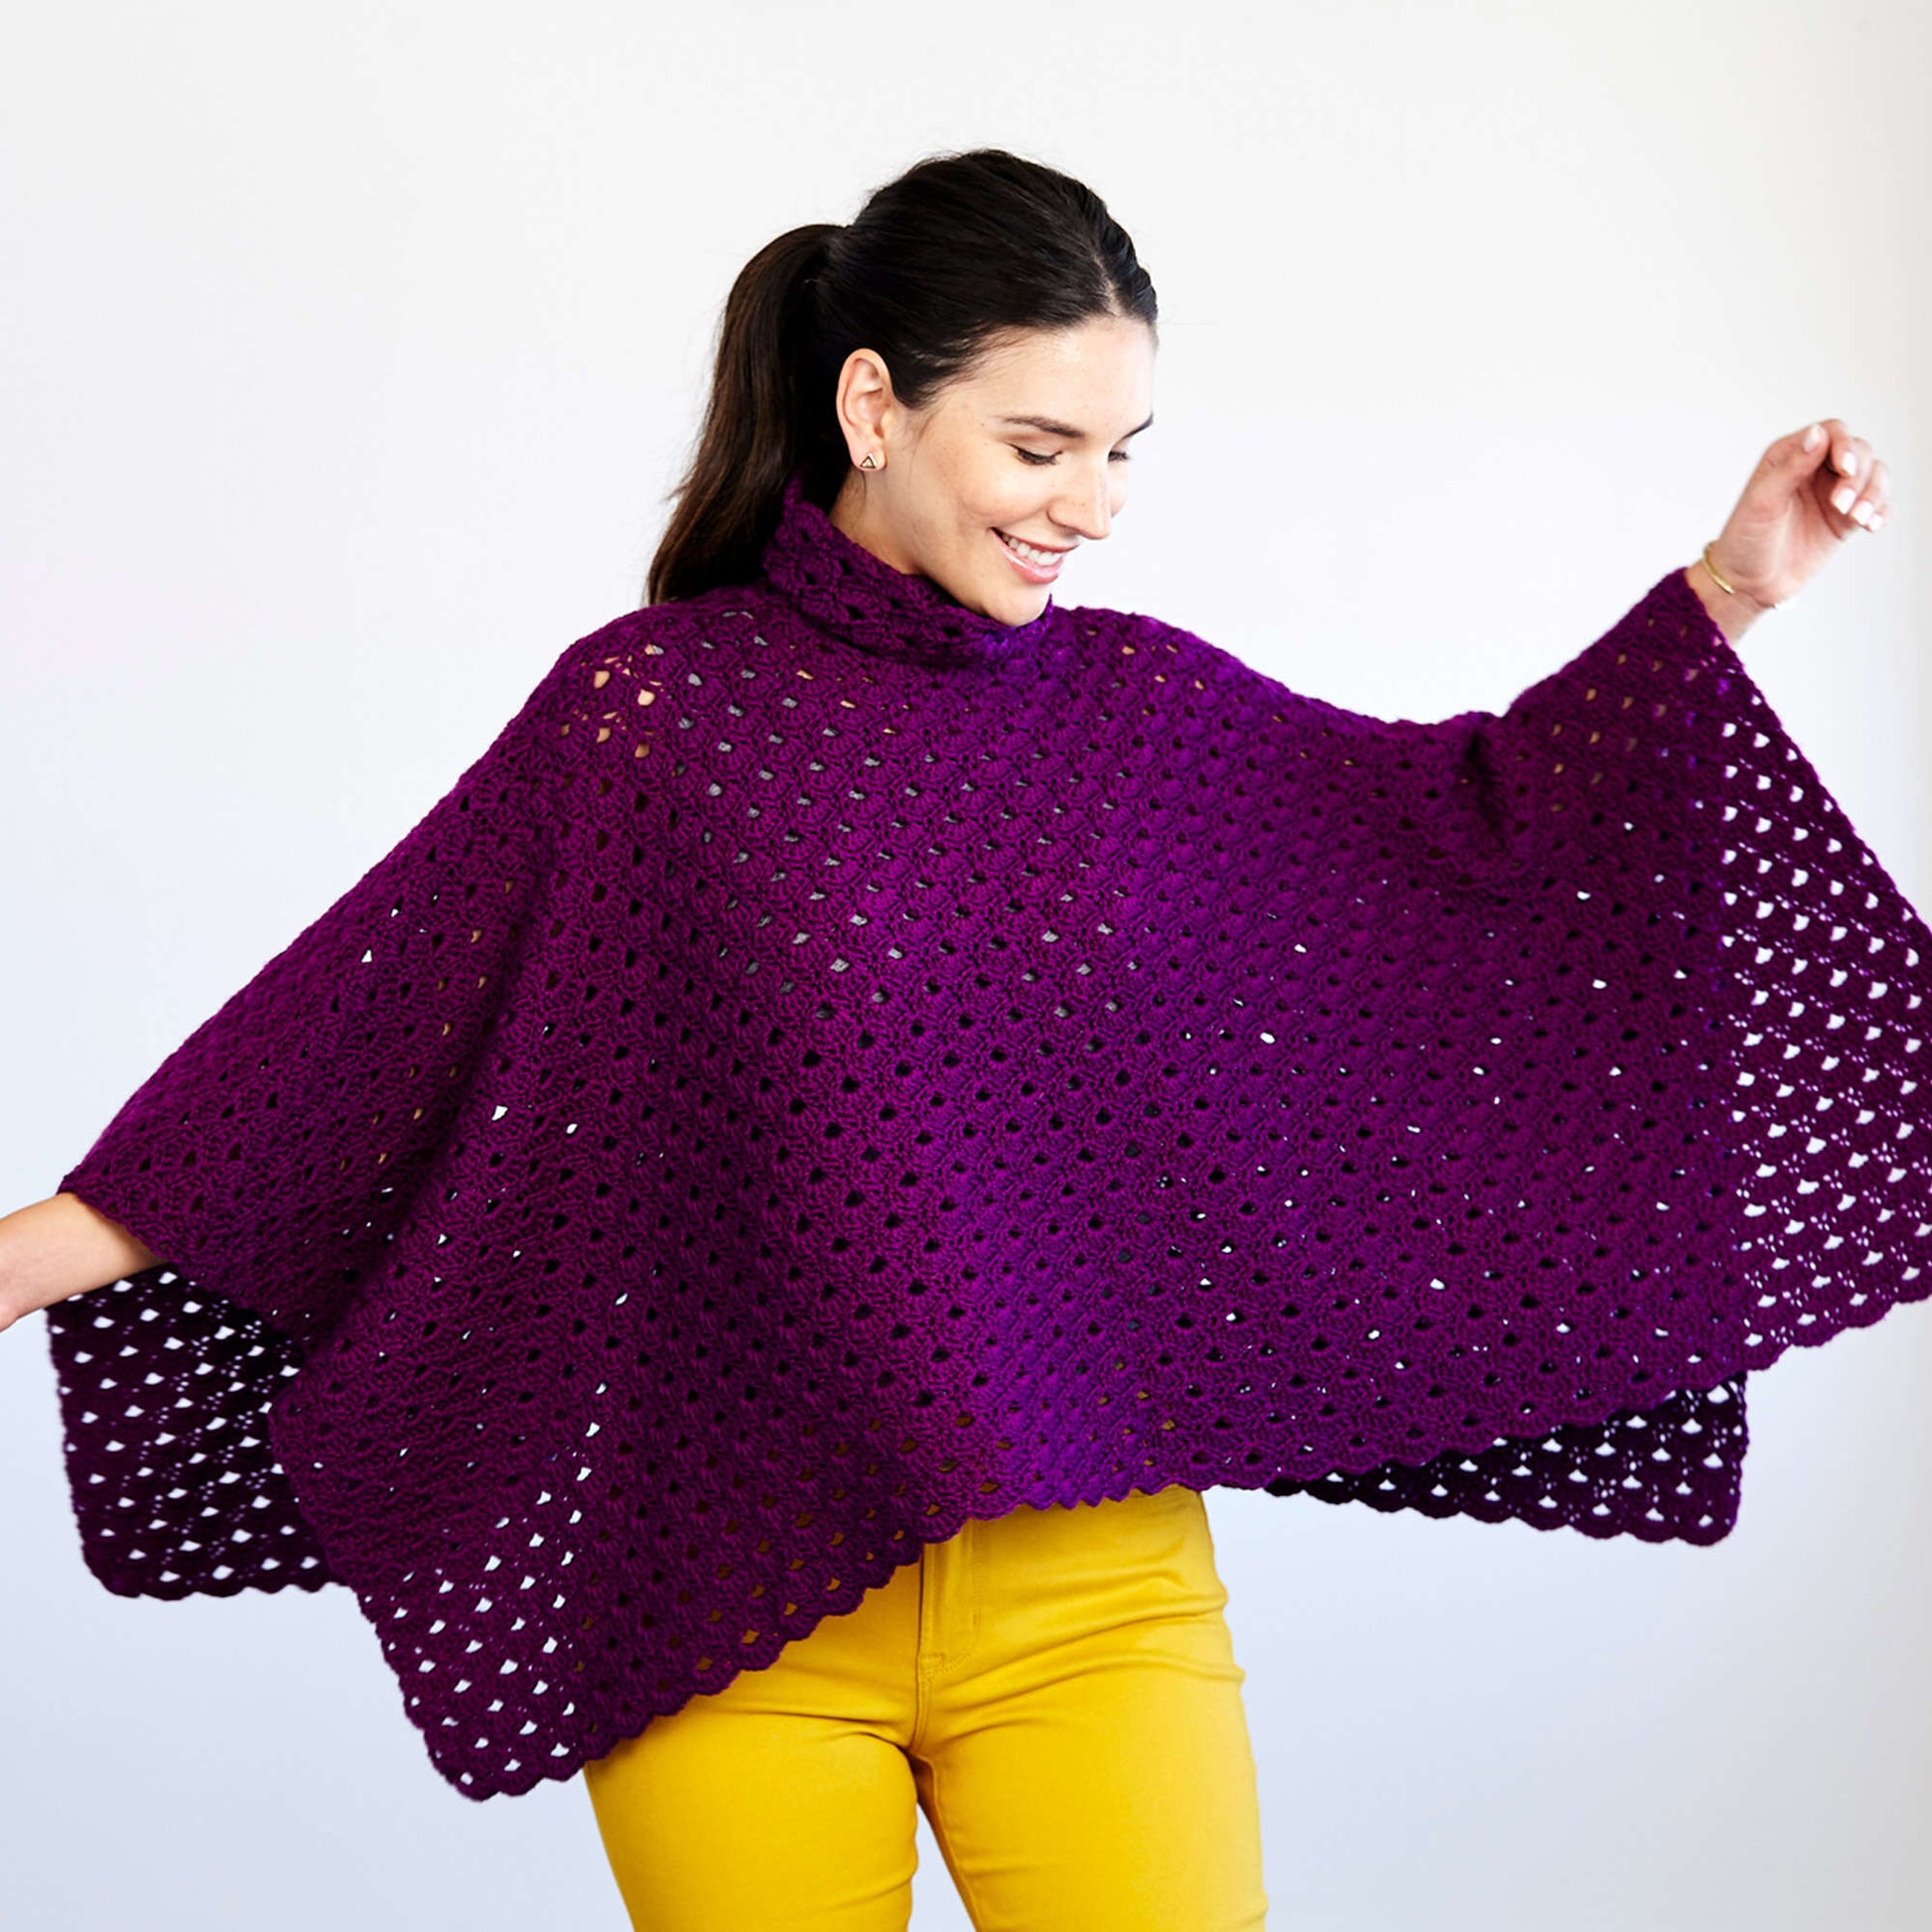 Red Heart Perfectly Panache Chic Poncho Red Heart Perfectly Panache Chic Poncho